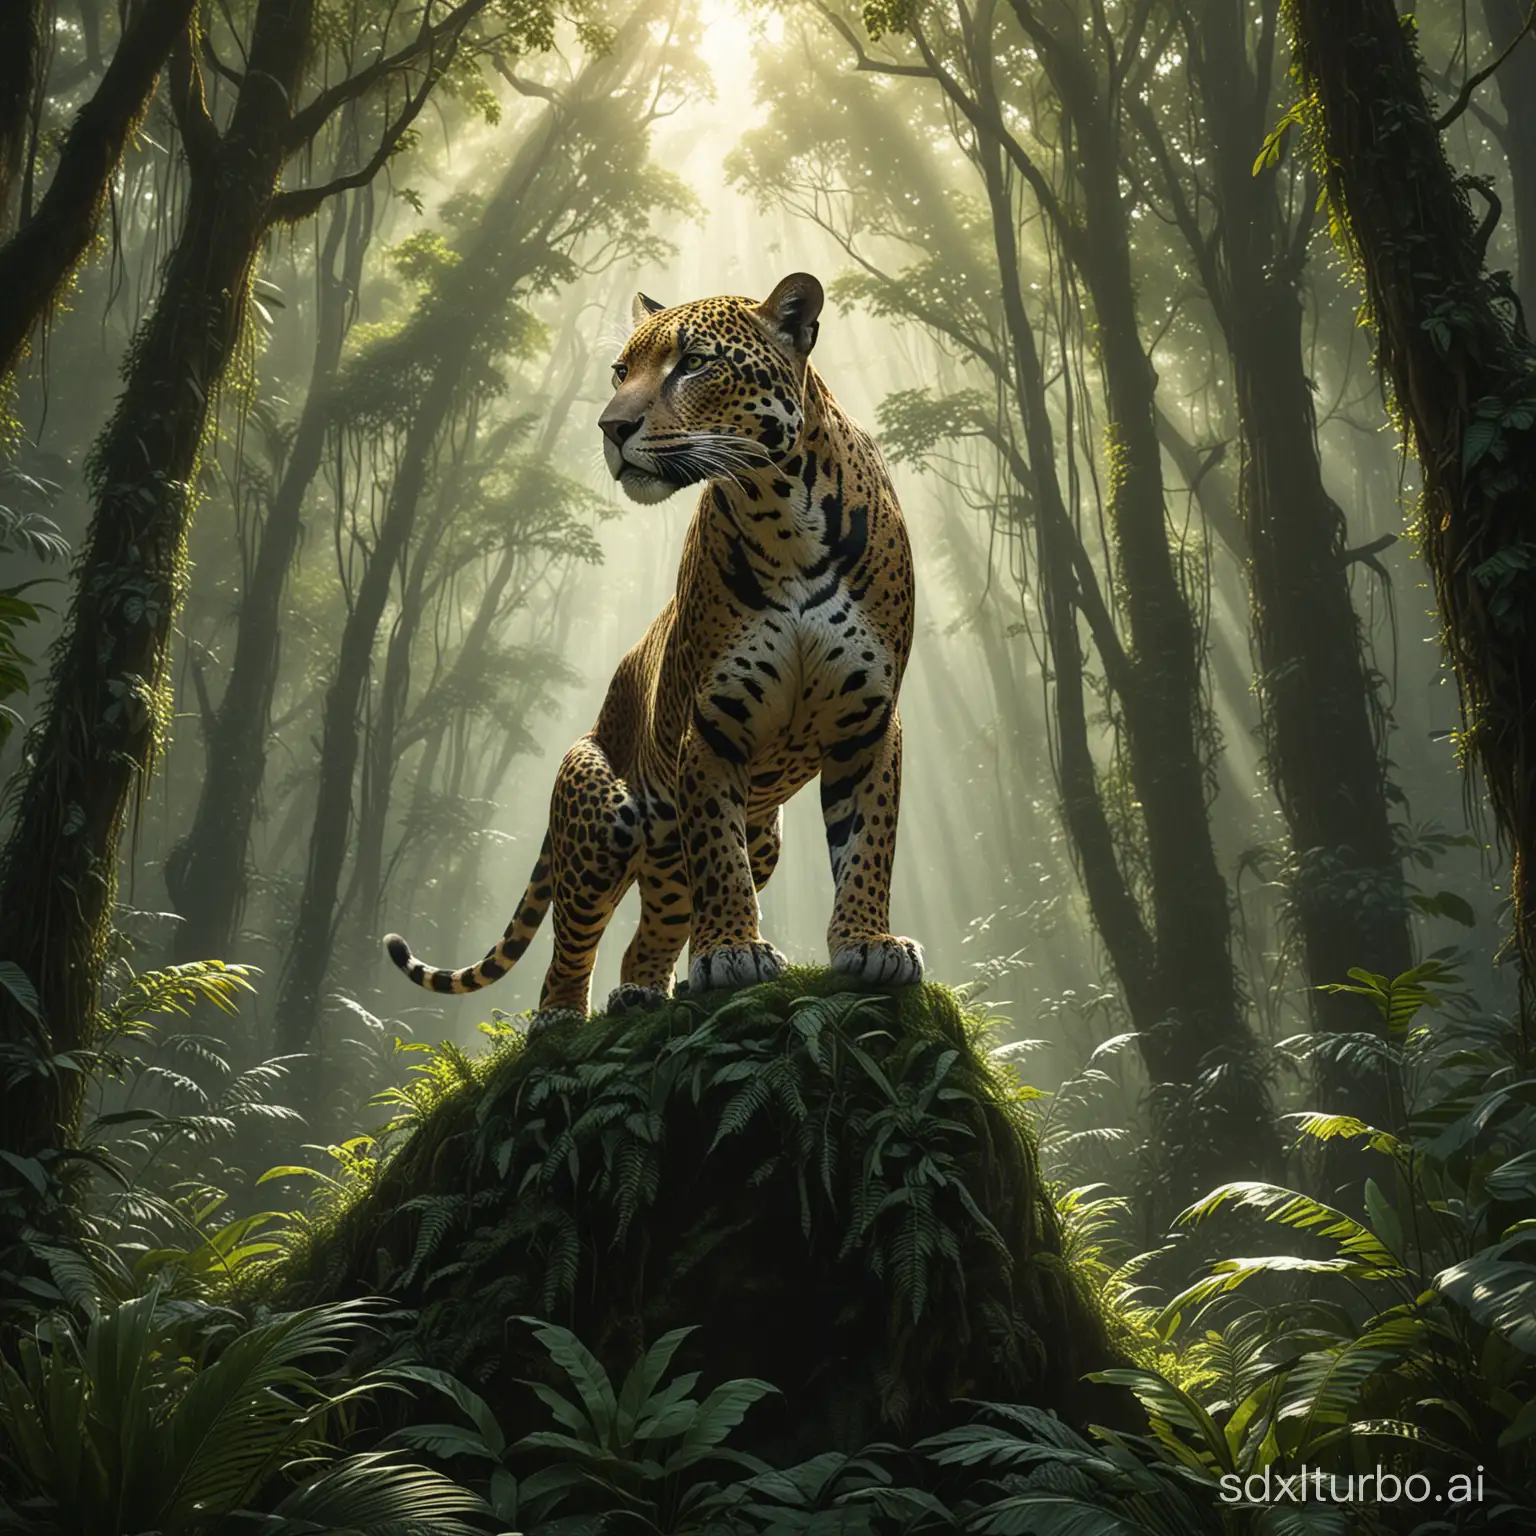 An ultra-realistic masterpiece artwork depicting "Forest Spirit", a majestic figure of a jaguar in a lush, dense rainforest. The scene shows a powerful and wise character, the guardian of the forest, embellished with emerald green and gold accents that reflect the surrounding flora. His posture is regal and commanding as he stands among ancient trees, with sunlight filtering through the canopy above, casting dynamic shadows around him. The artwork should evoke a sense of awe and mystery, blending the character seamlessly with the wild, natural beauty of the amazonian forest